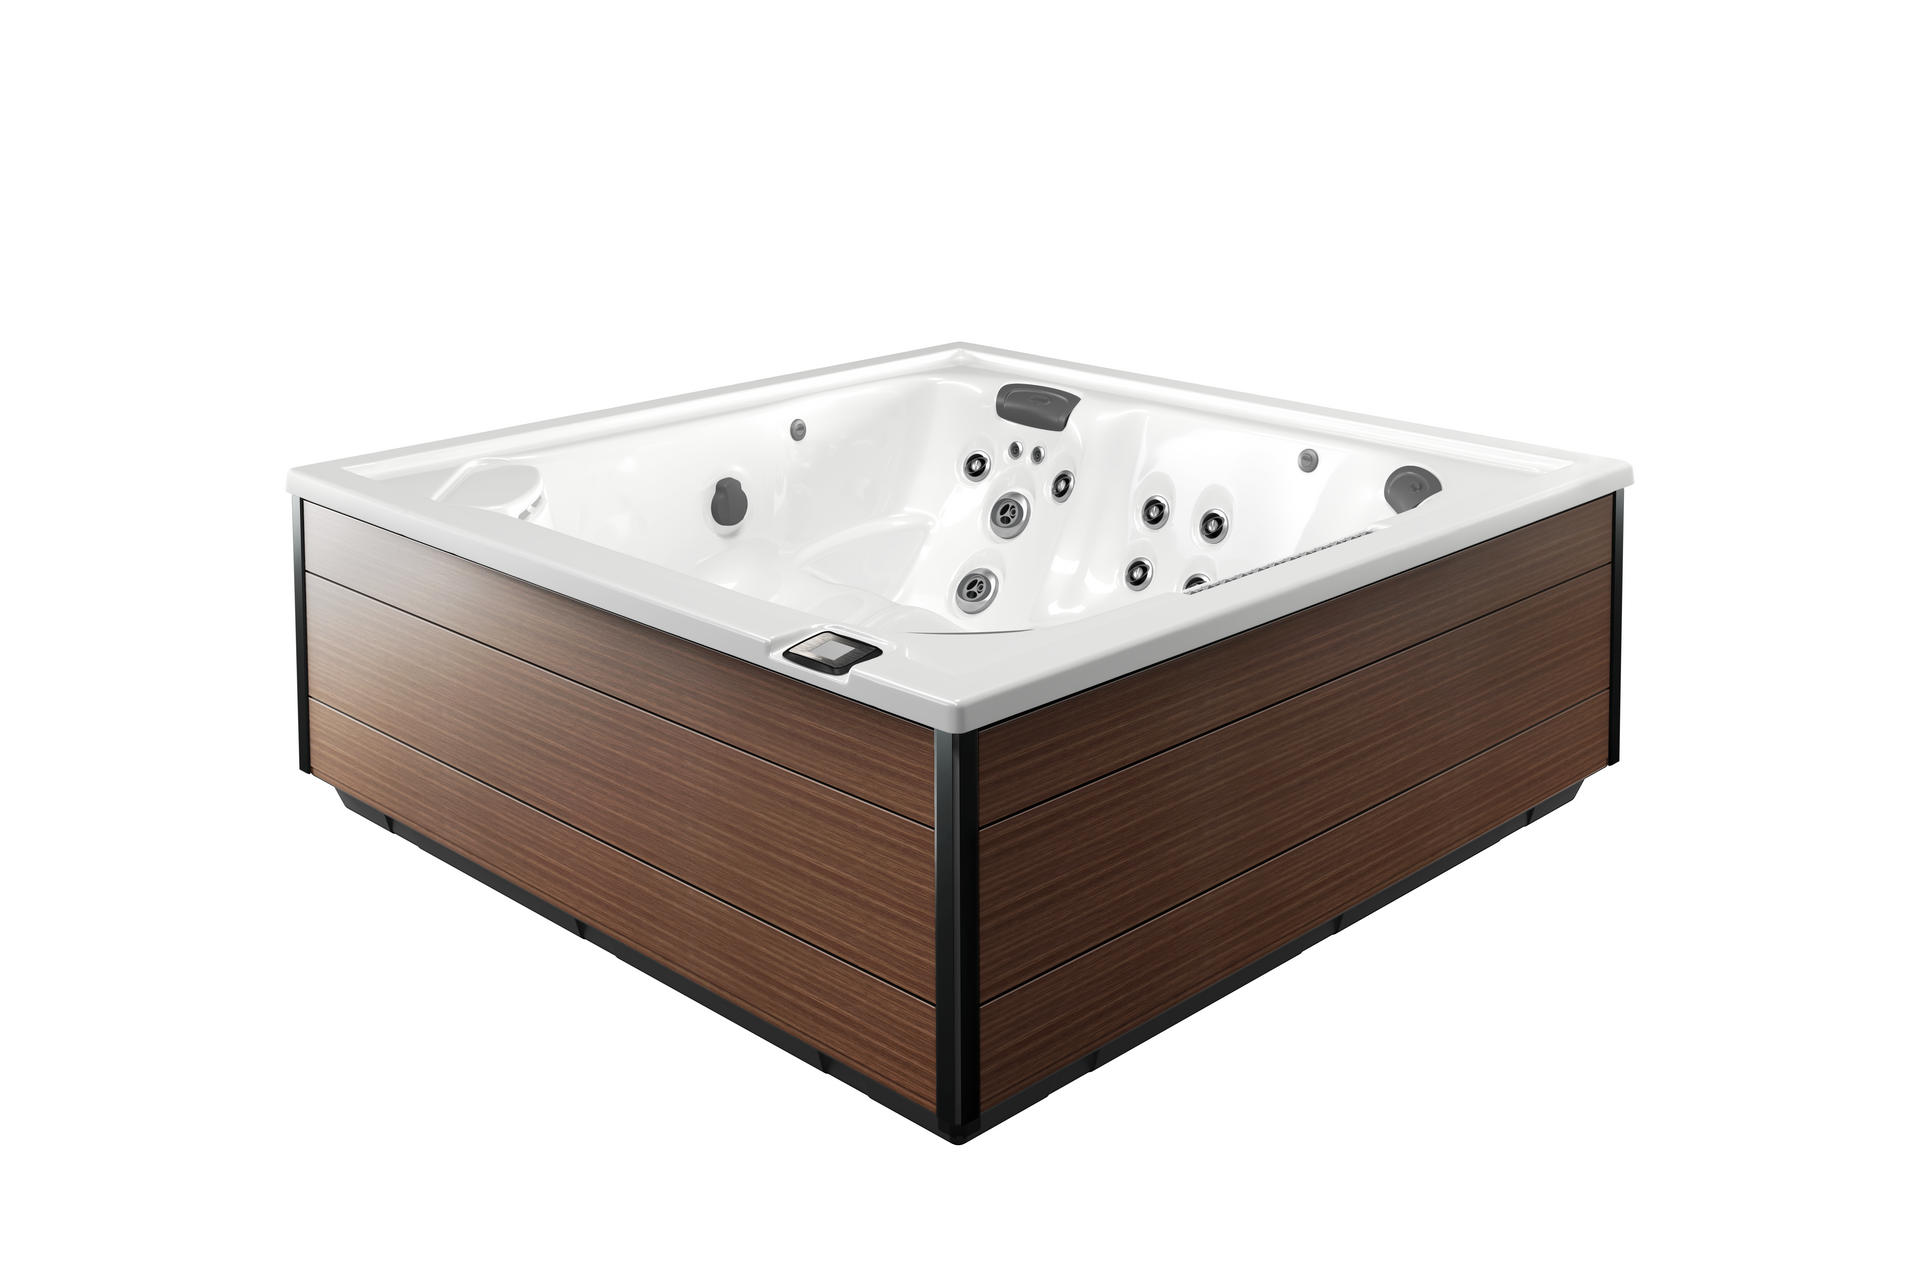 Dive Into Relaxation & Wellness With The Jacuzzi J-LXL From Jacuzzi